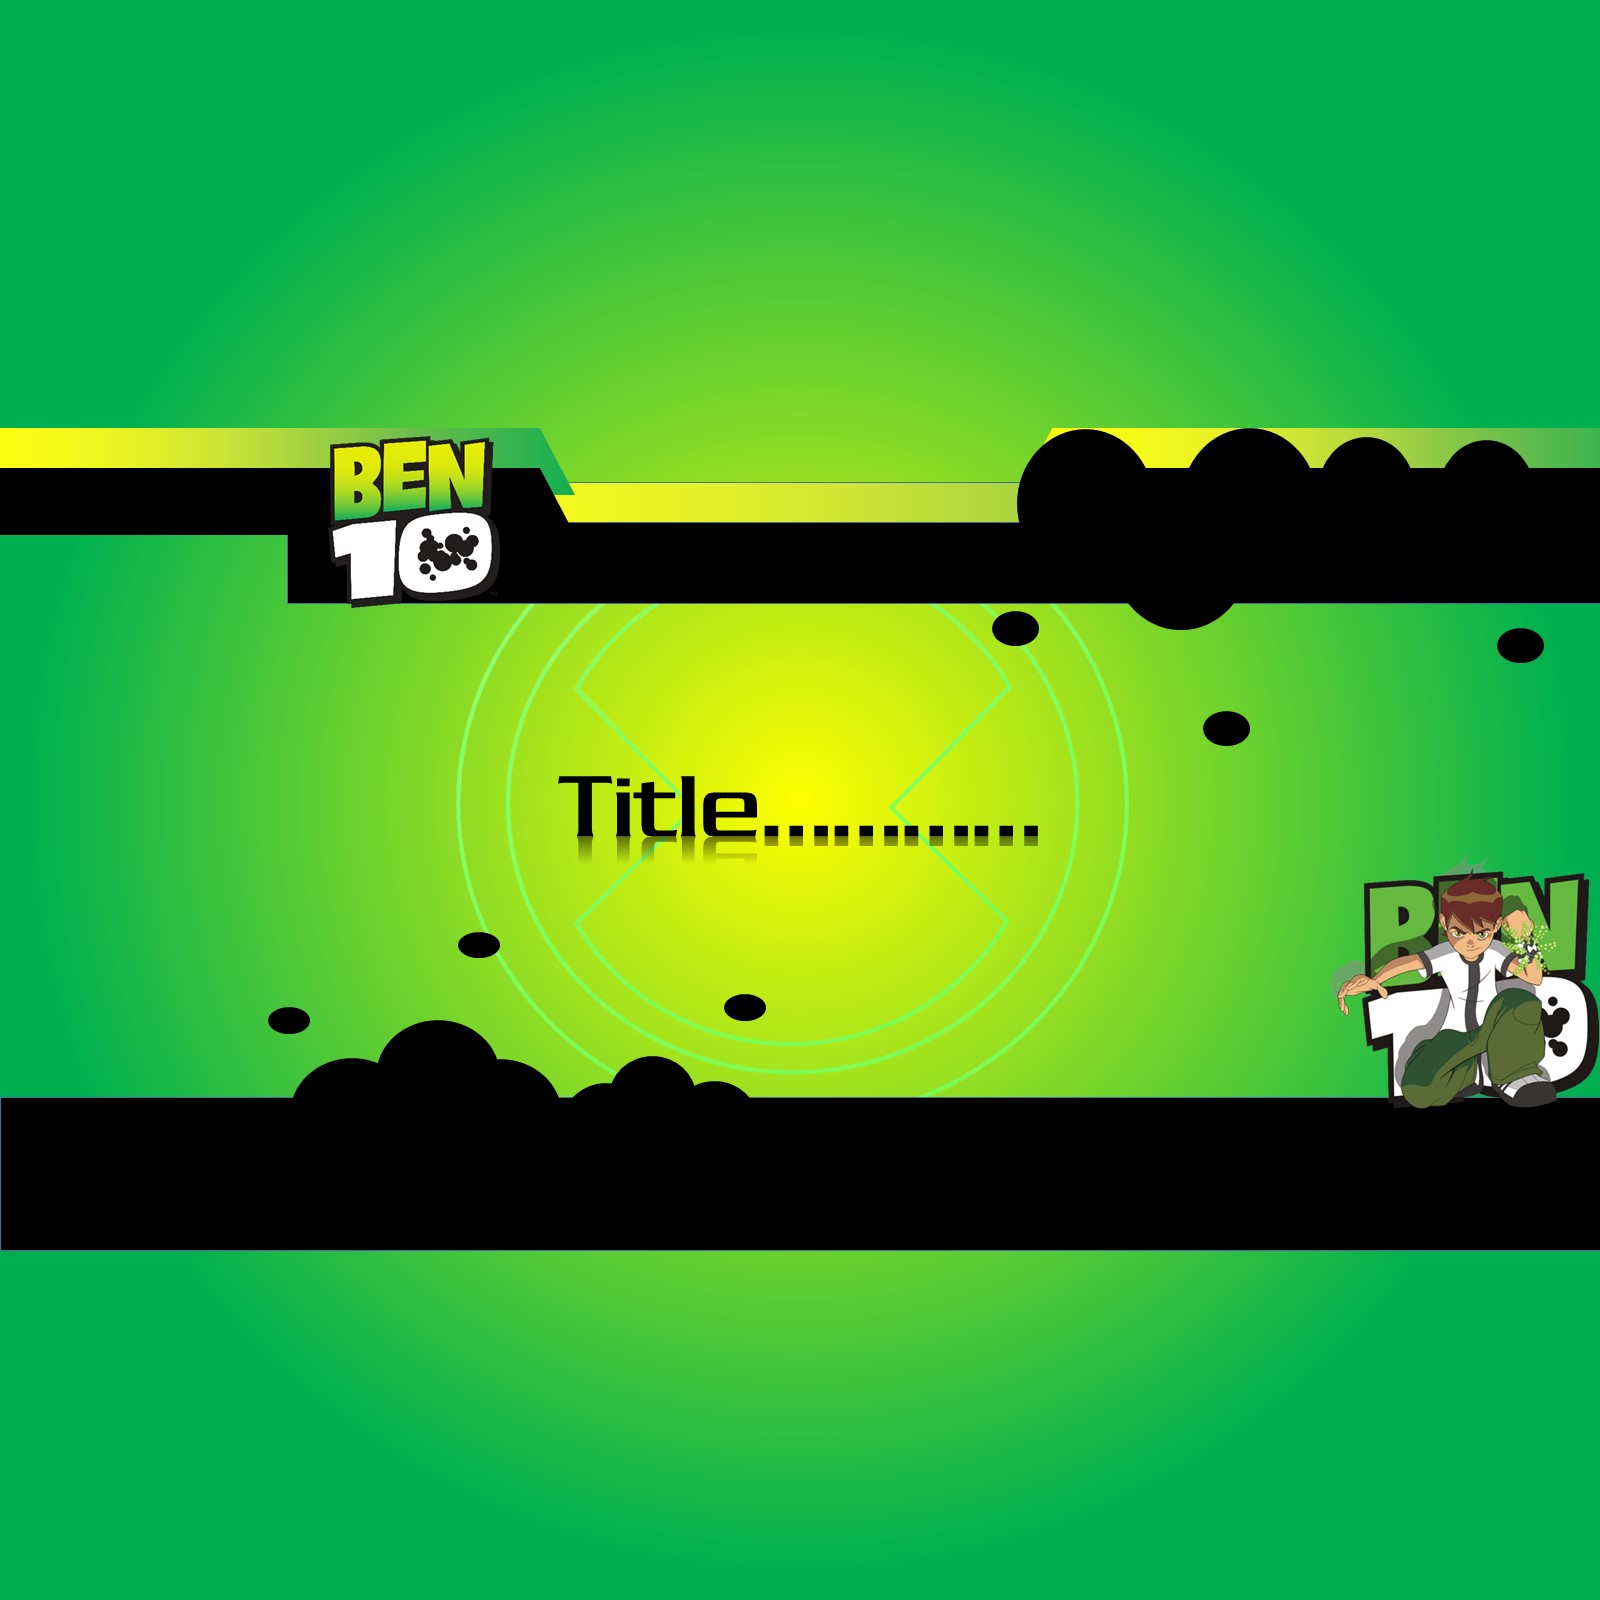 BEN 10 POWER POINT TEMPLATES cover image.